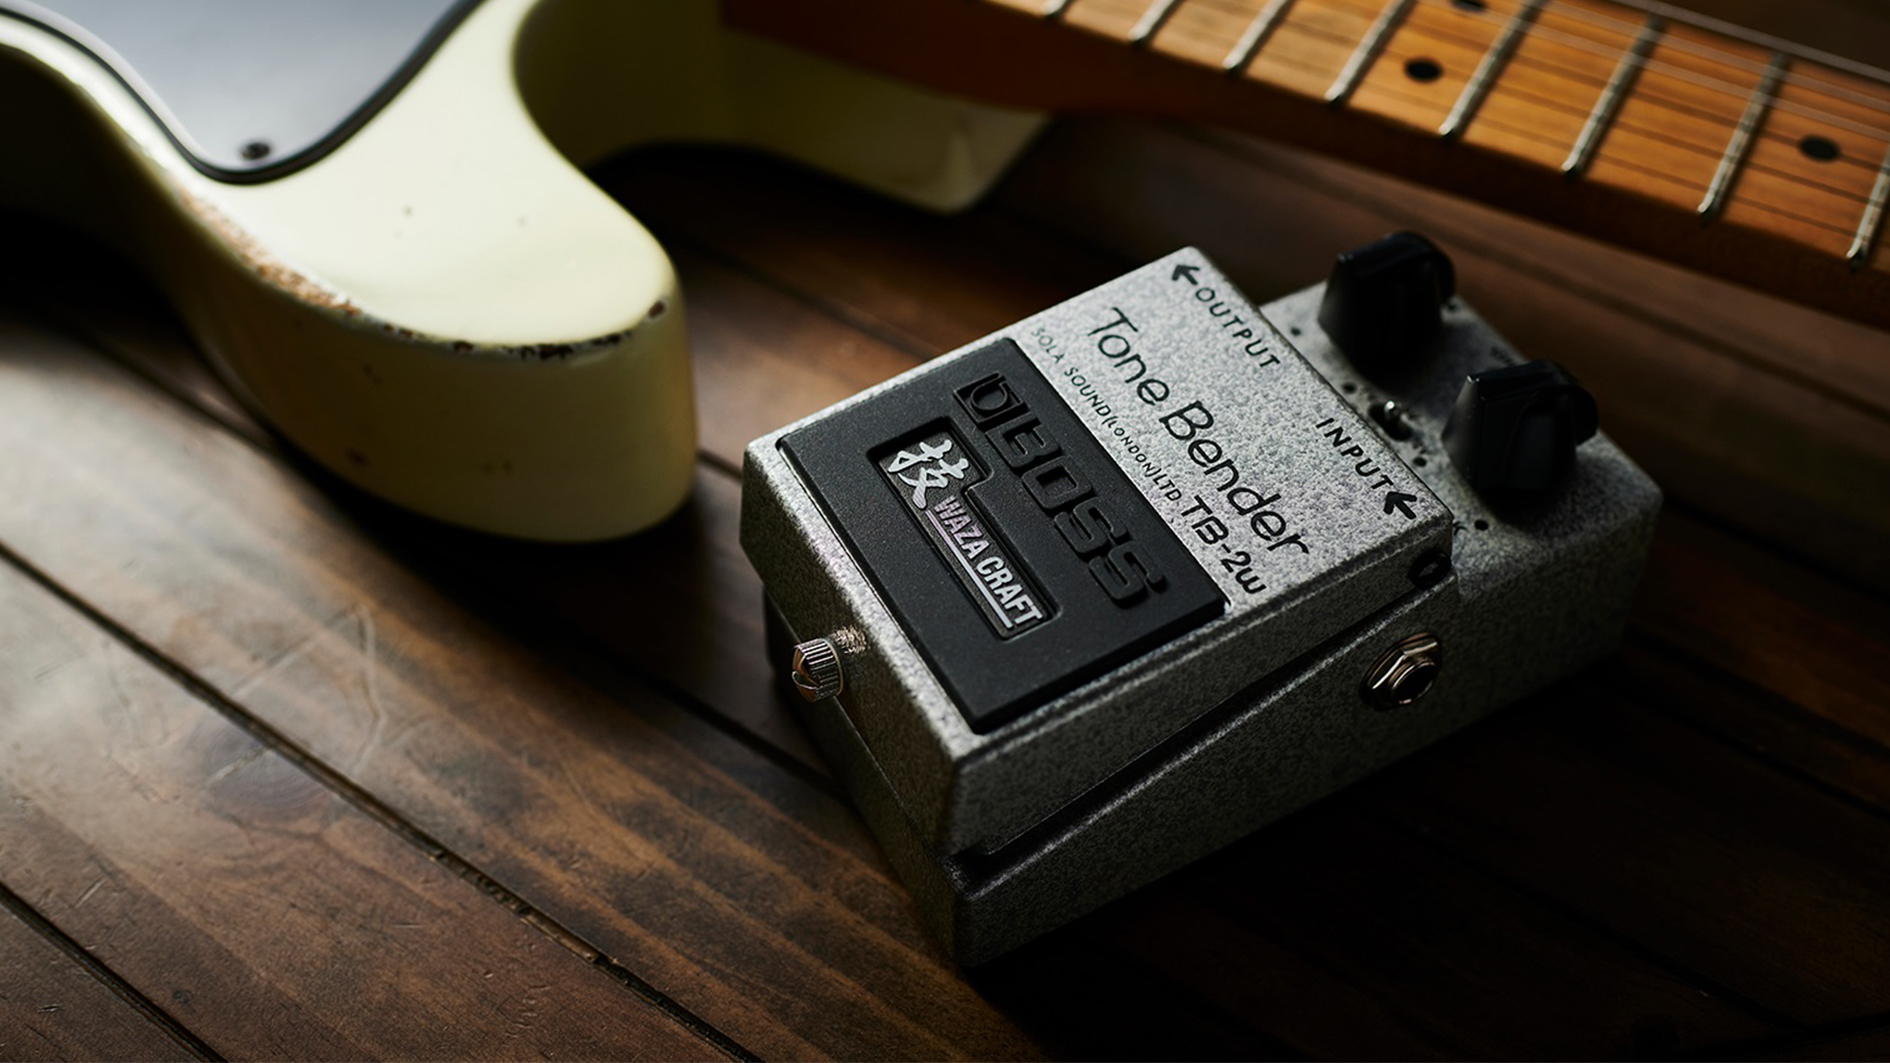 Boss teams up with Sola Sound for Waza Craft TB-2W Tone Bender fuzz pedal |  Guitar World